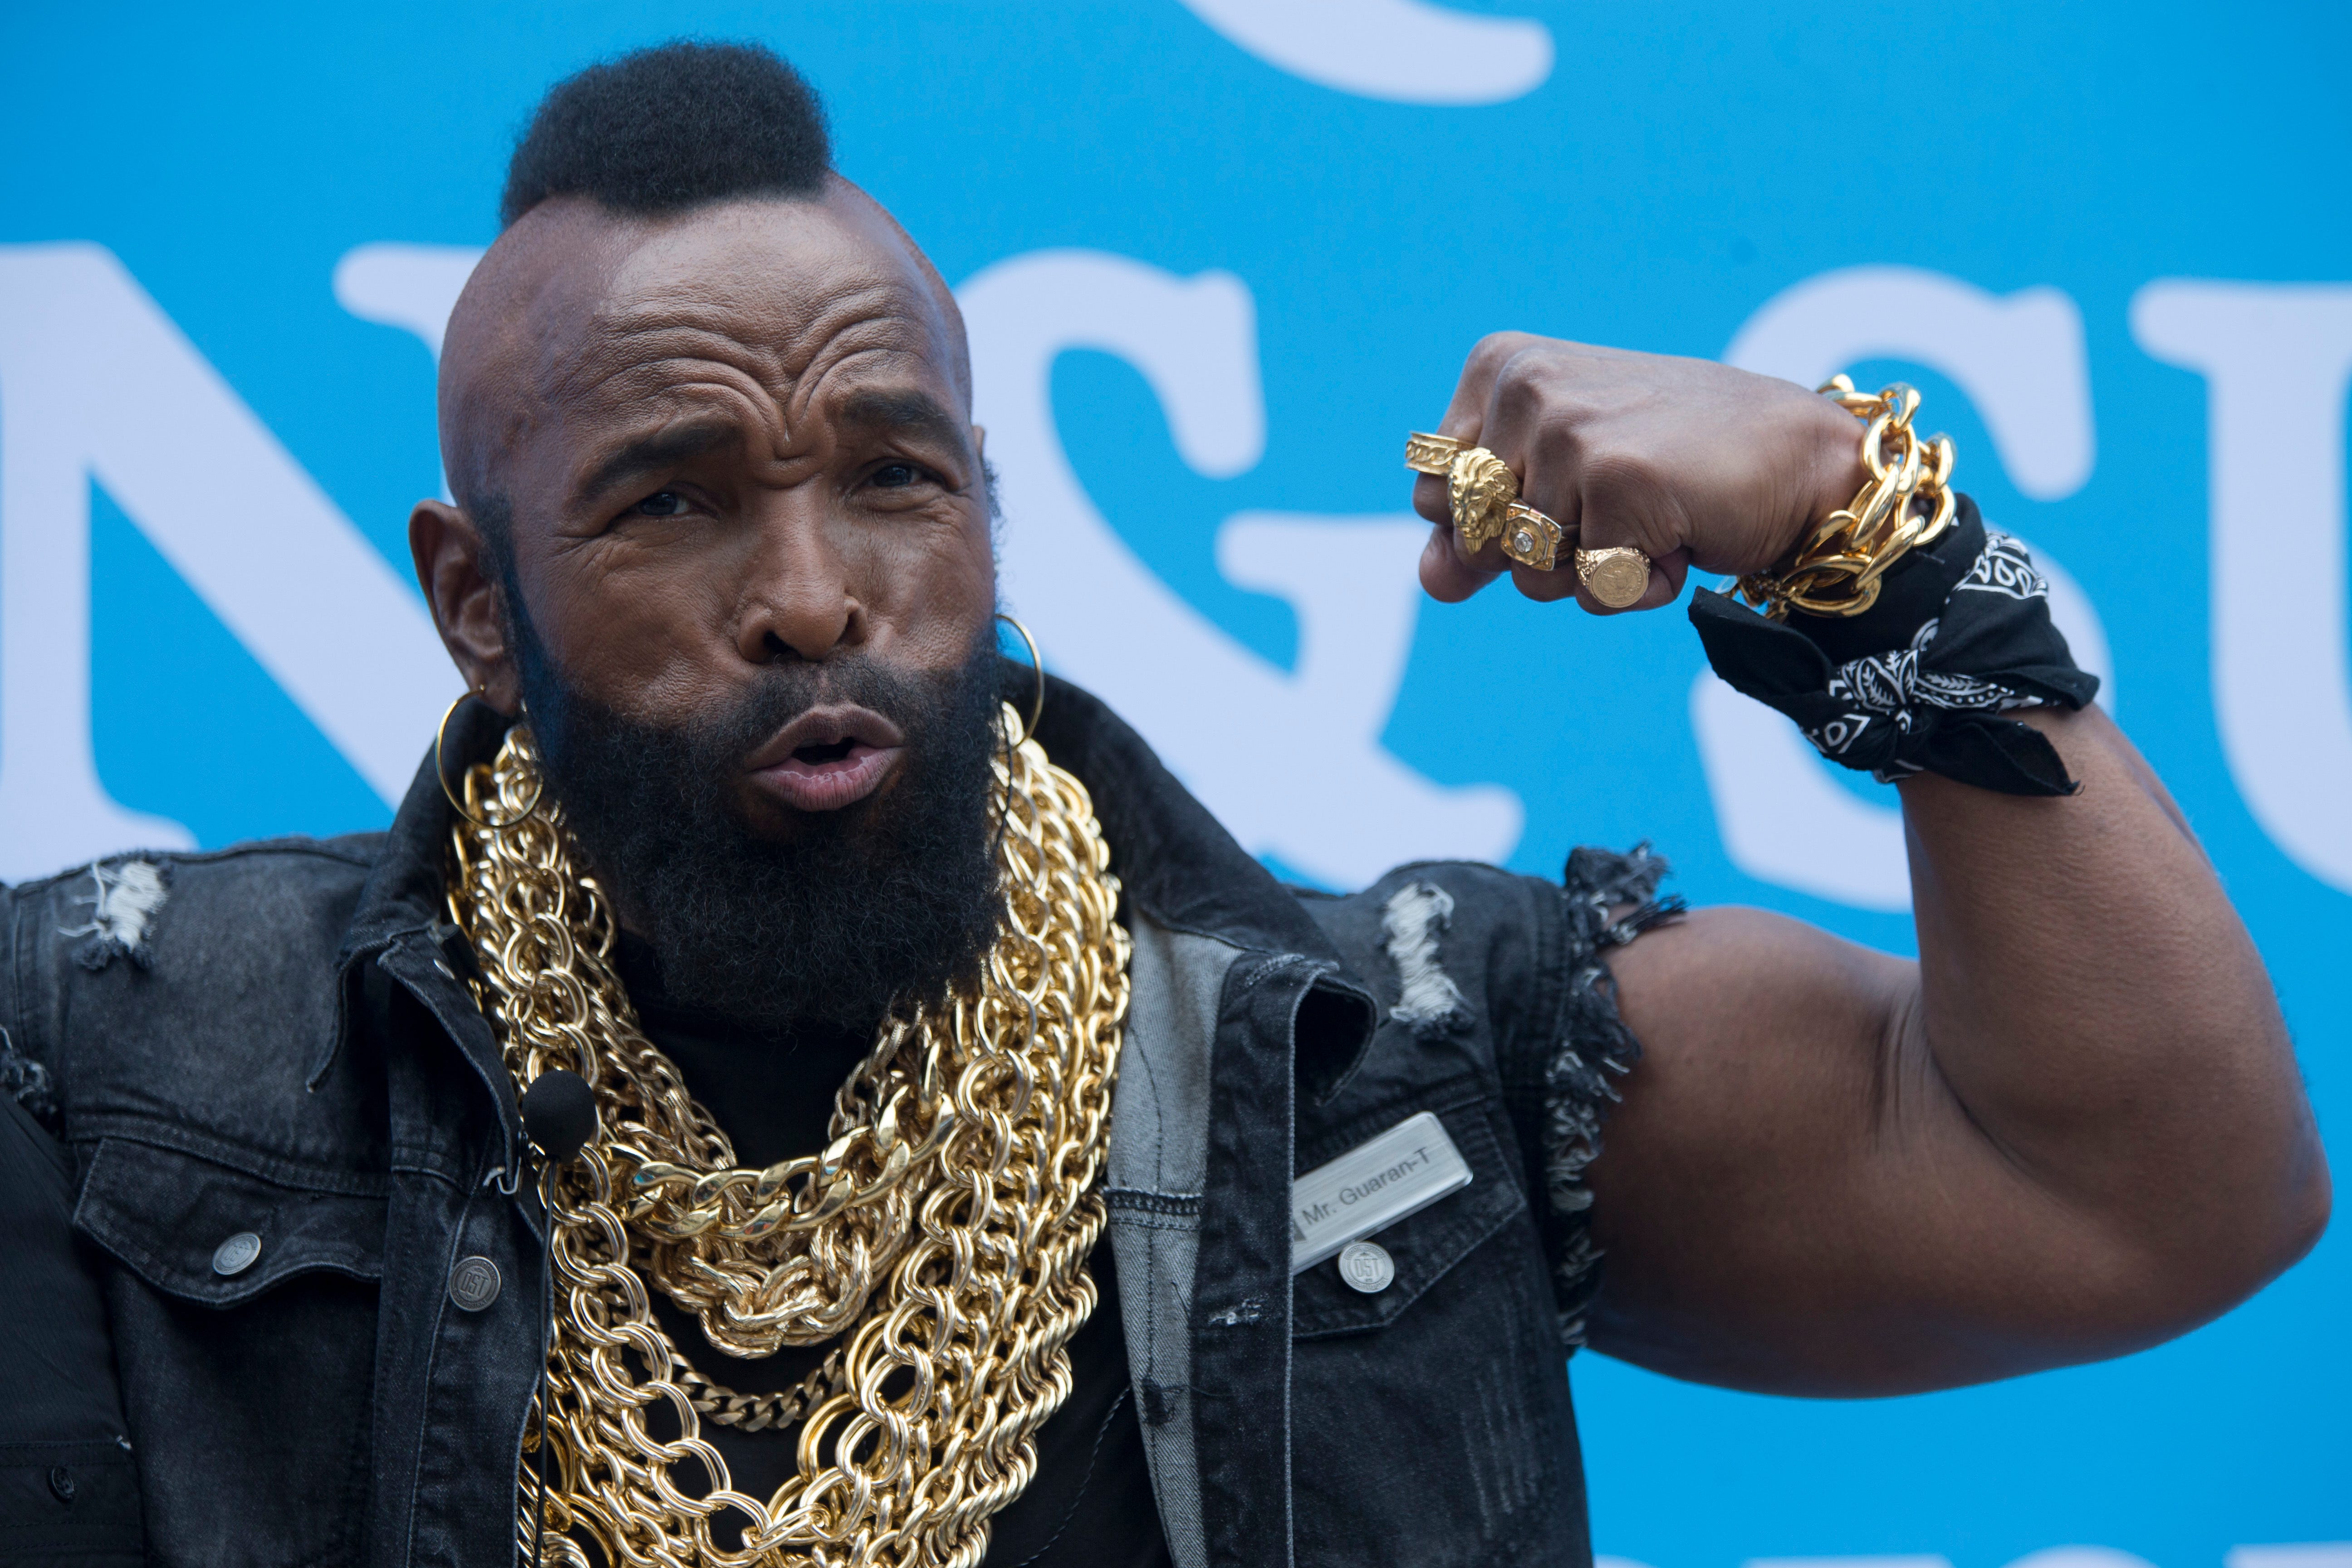 Mr. T pities the fool who isn't watching Paralympics.